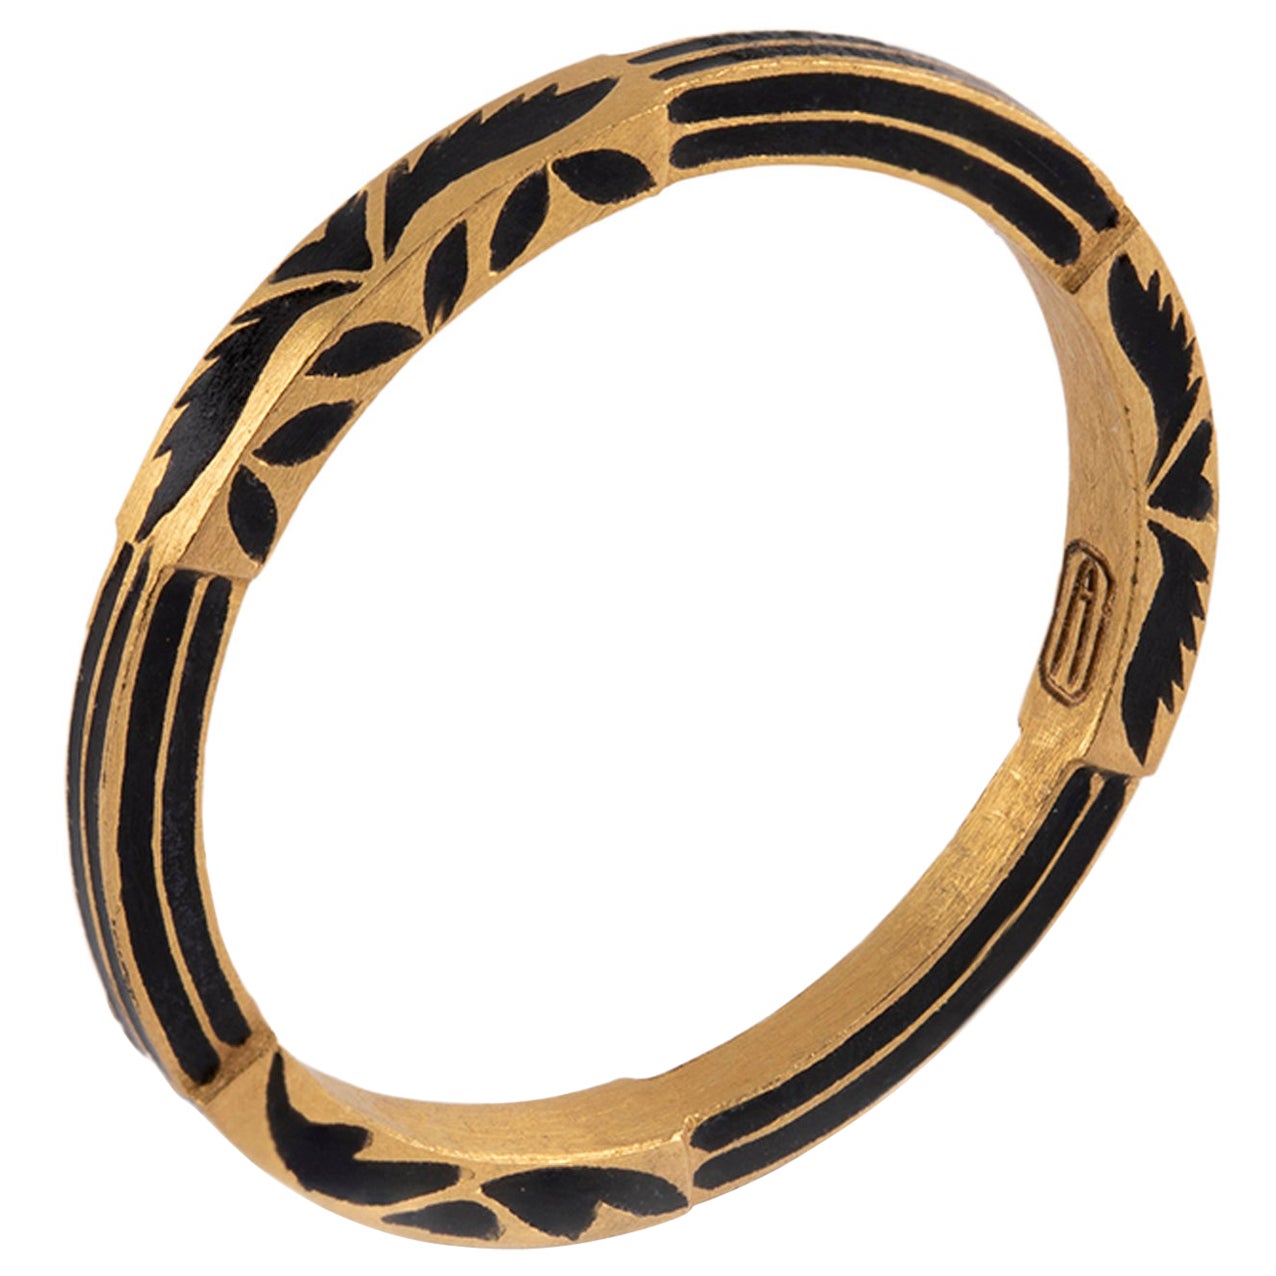 22K Gold Black Enamel Floral and Striped Infinity Band Ring Handmade by Agaro 